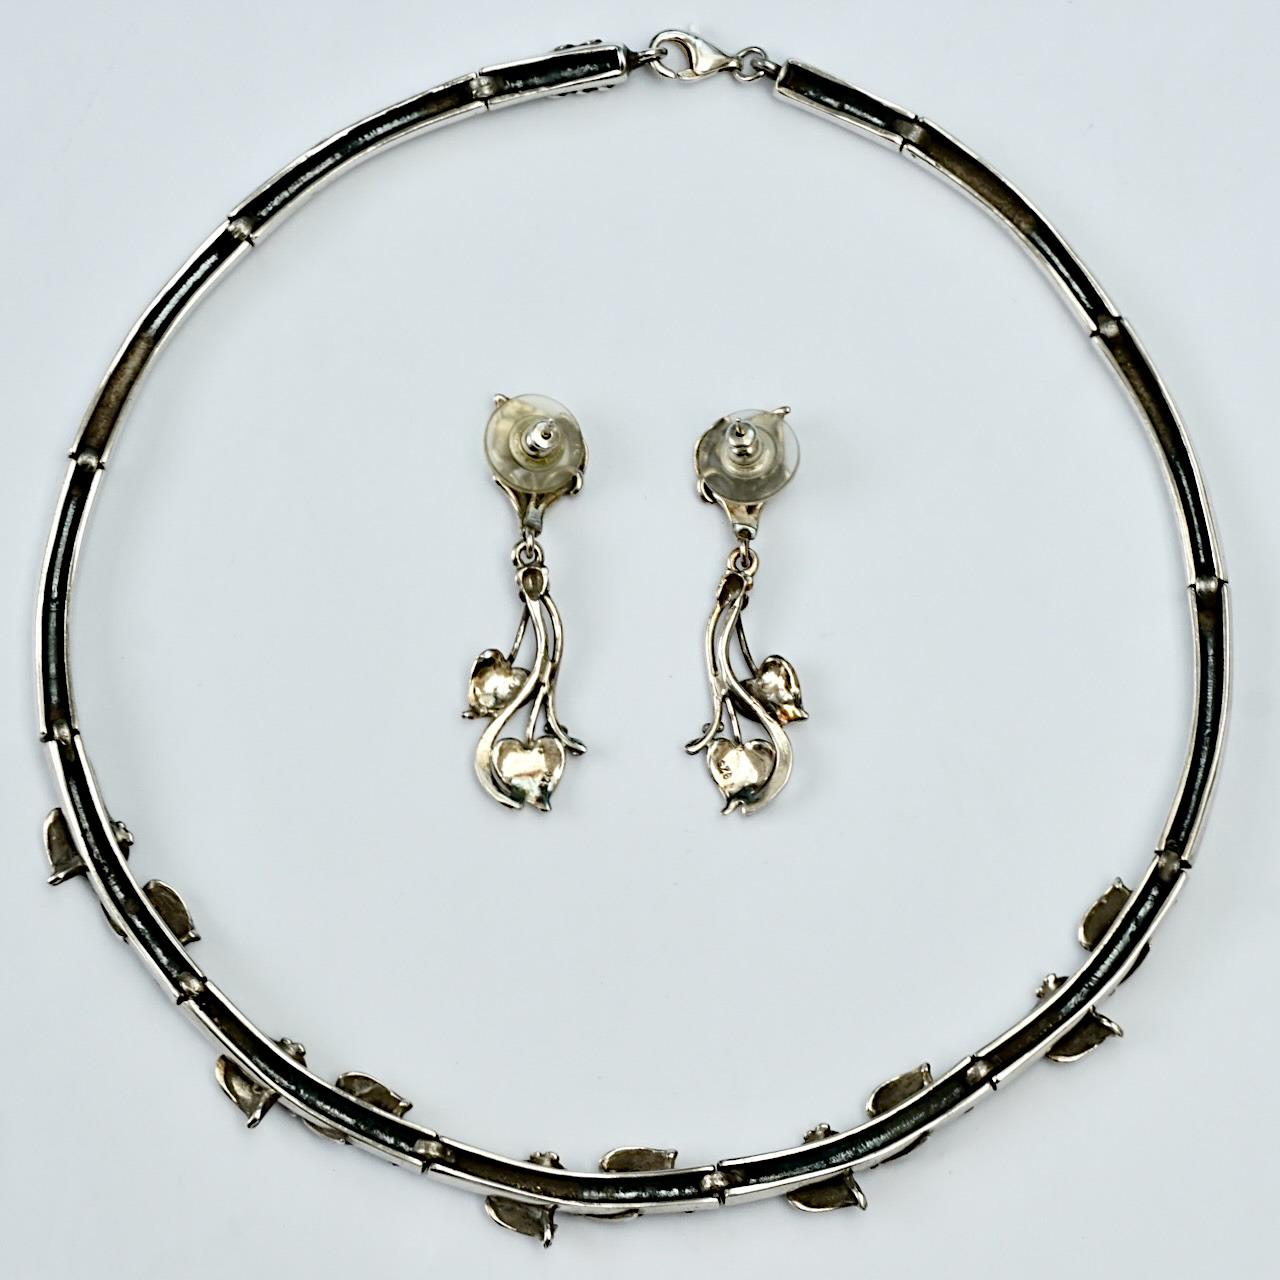 Sterling Silver Art Nouveau Style Collar Necklace and Earrings Set circa 1990s For Sale 7